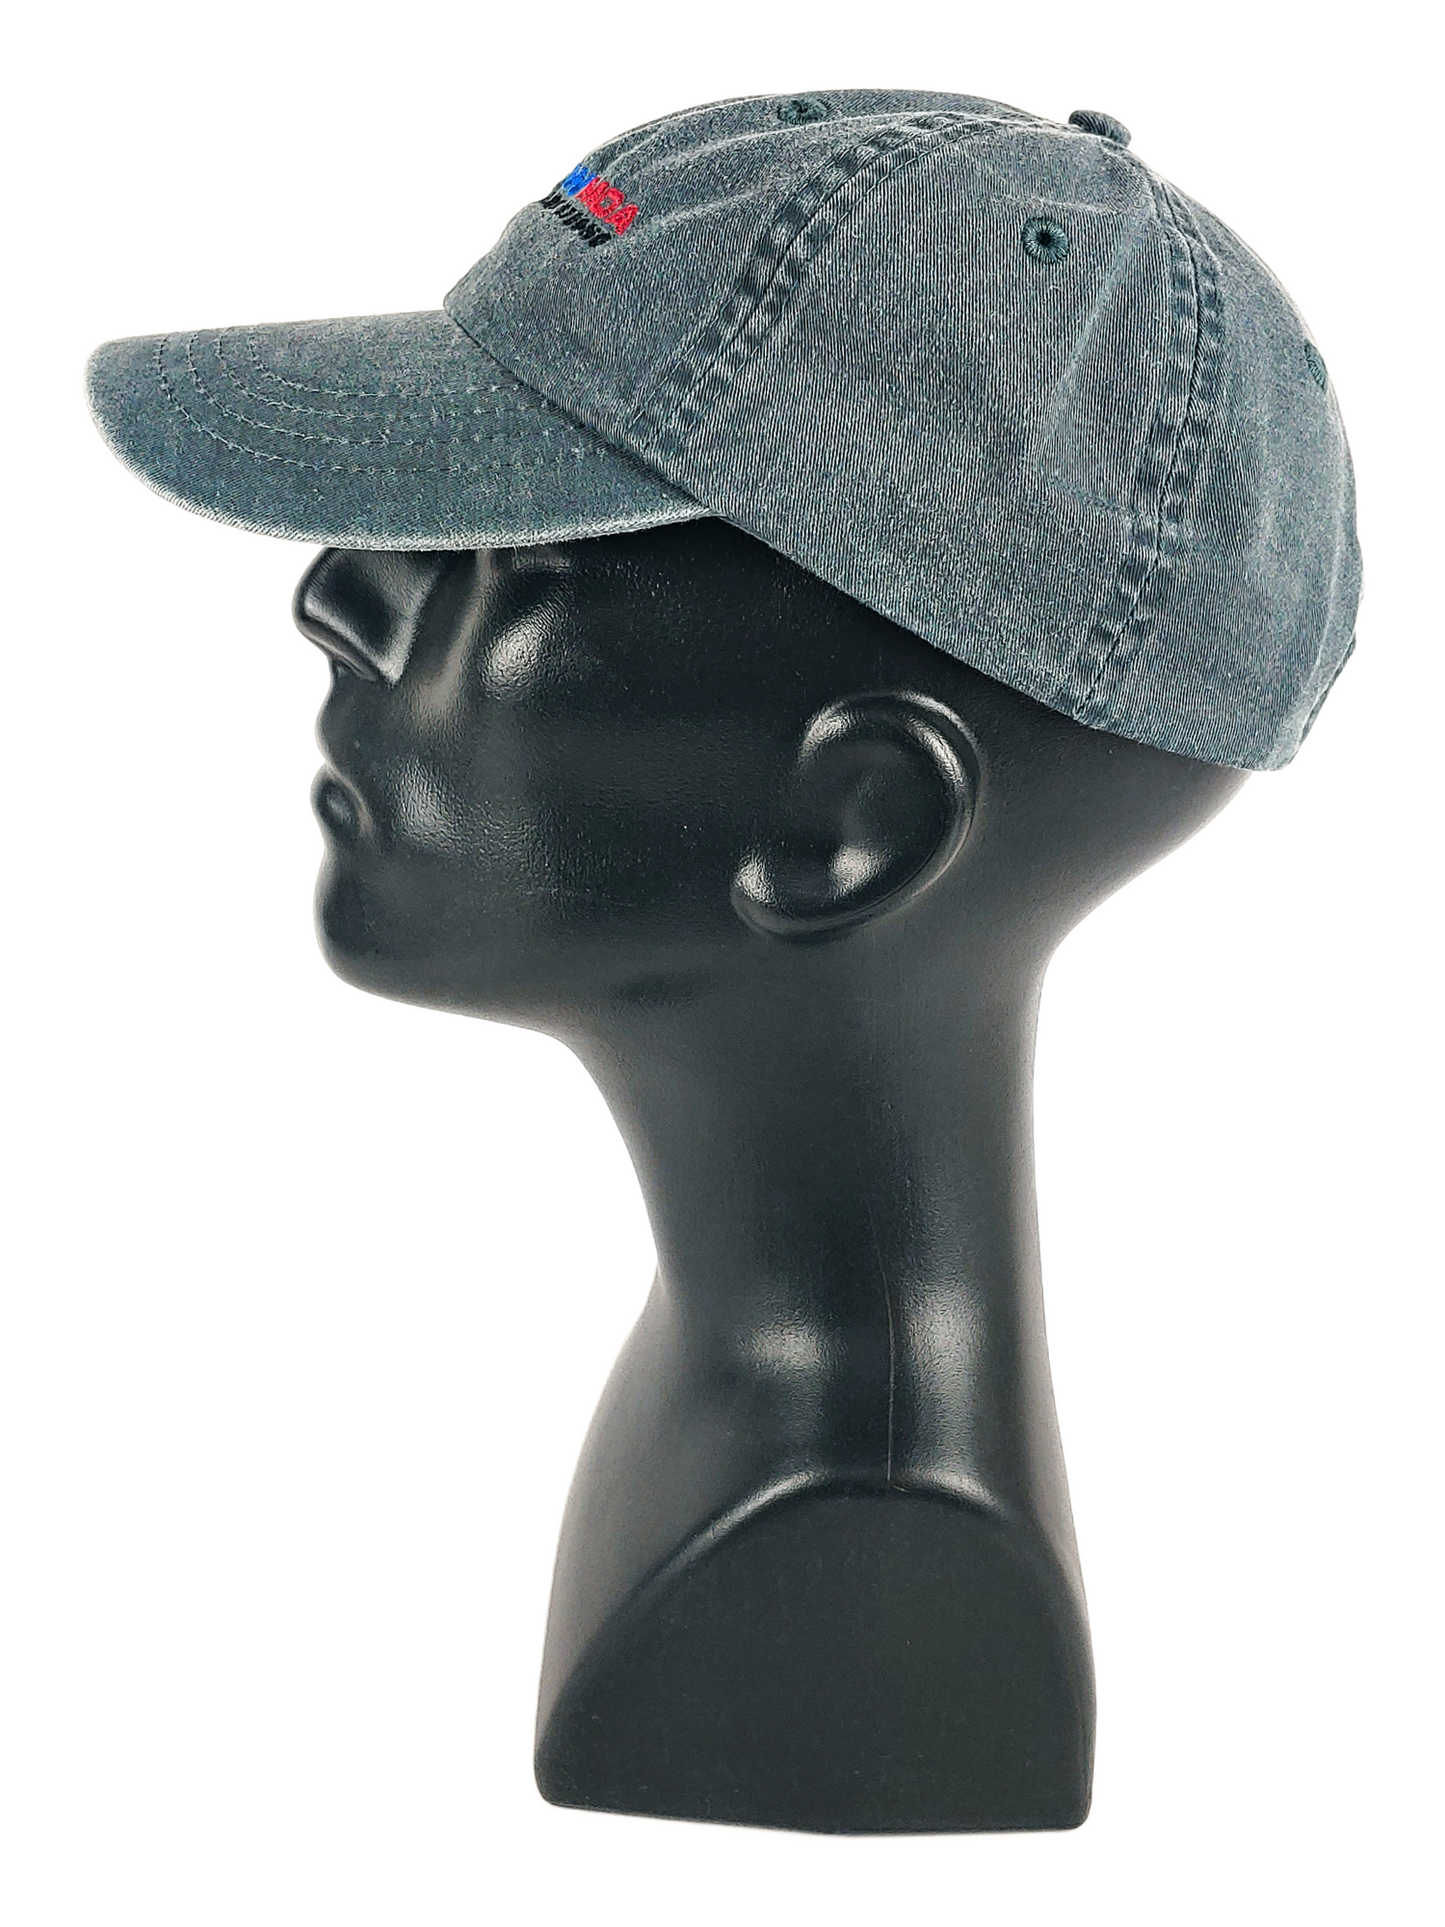 50 Years Strong - Charcoal Garment Washed - Unisex Baseball Style Hat